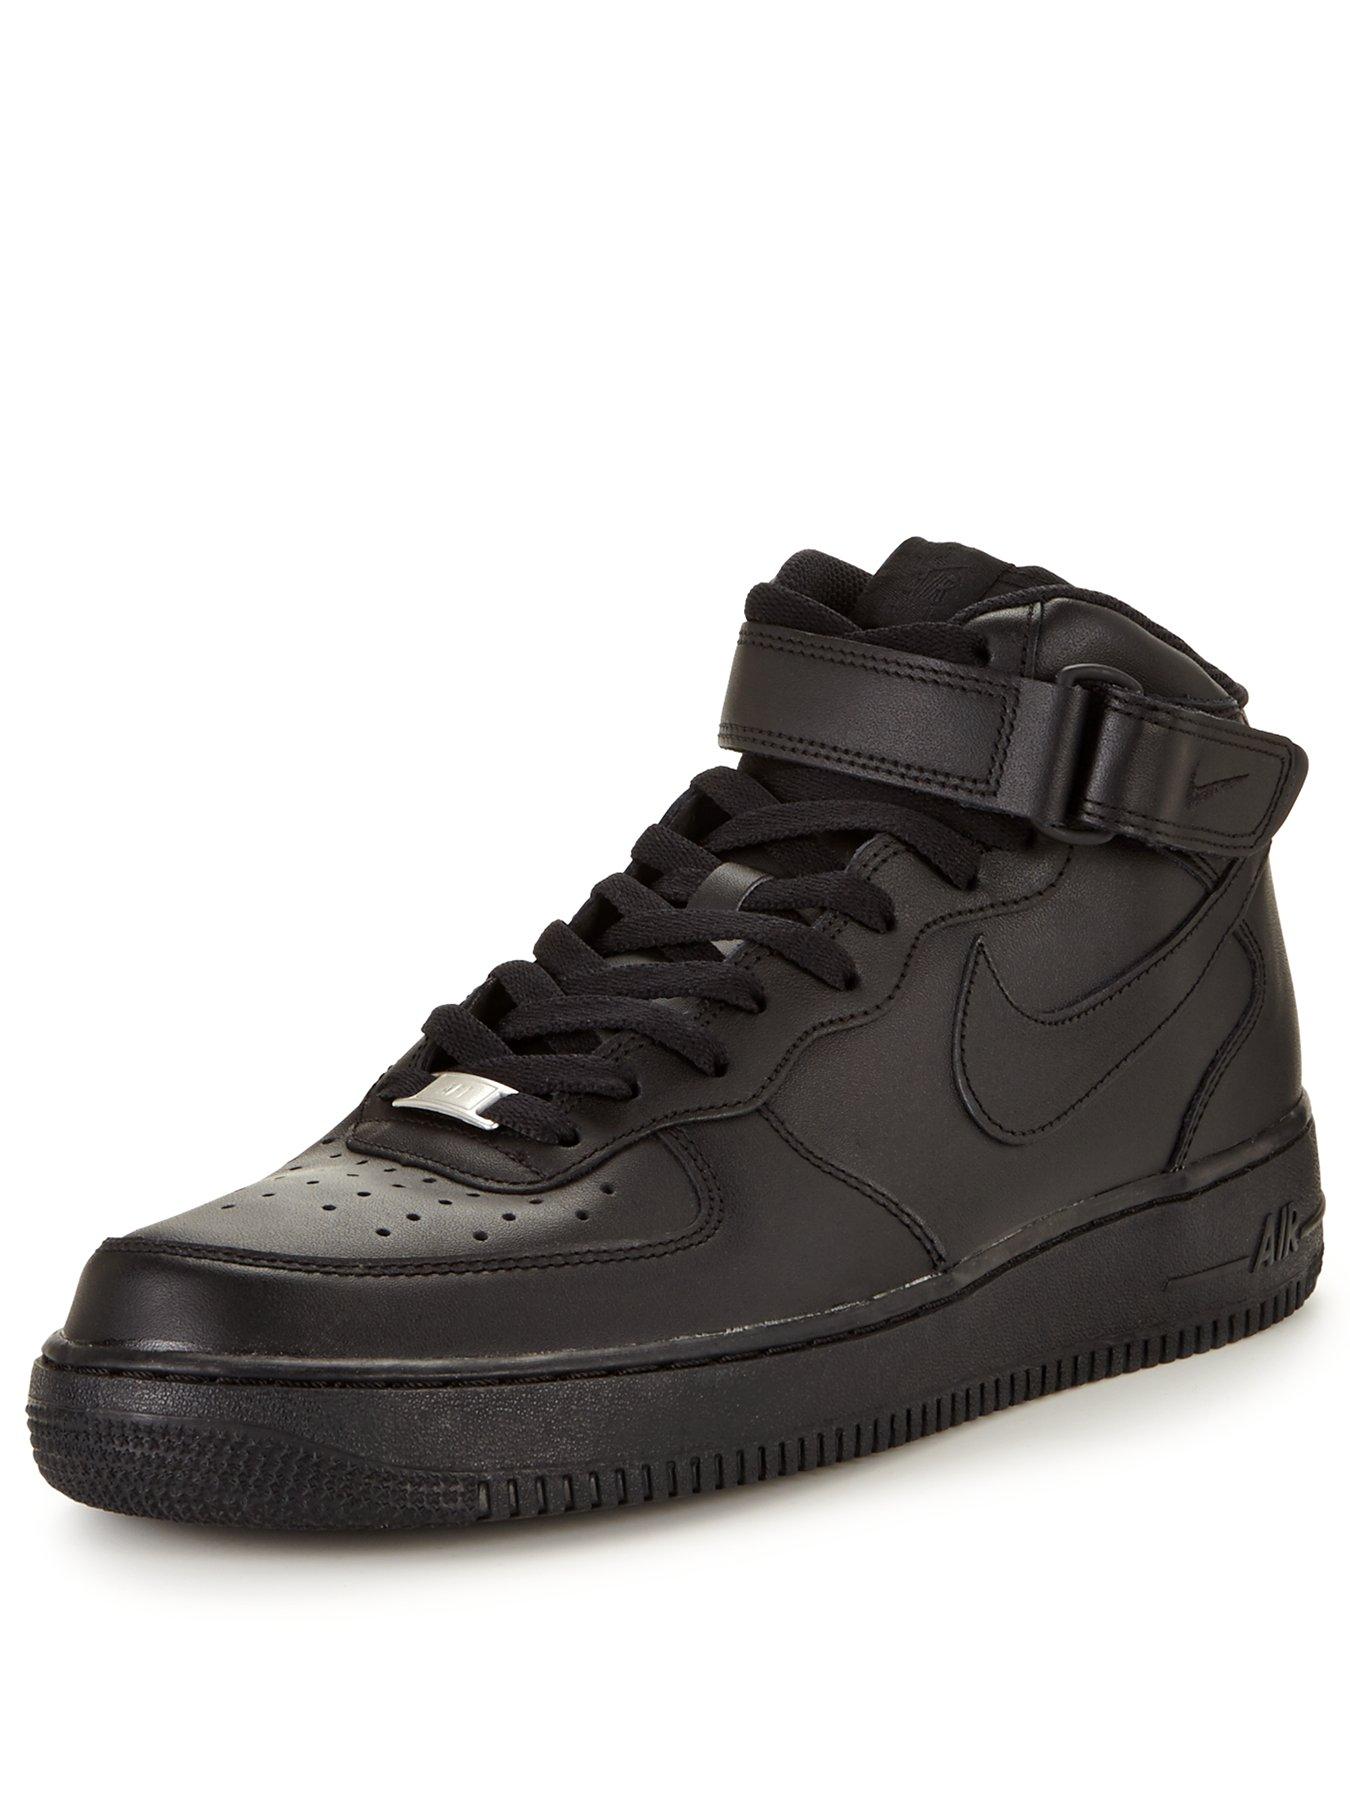 sports direct nike air force 1 